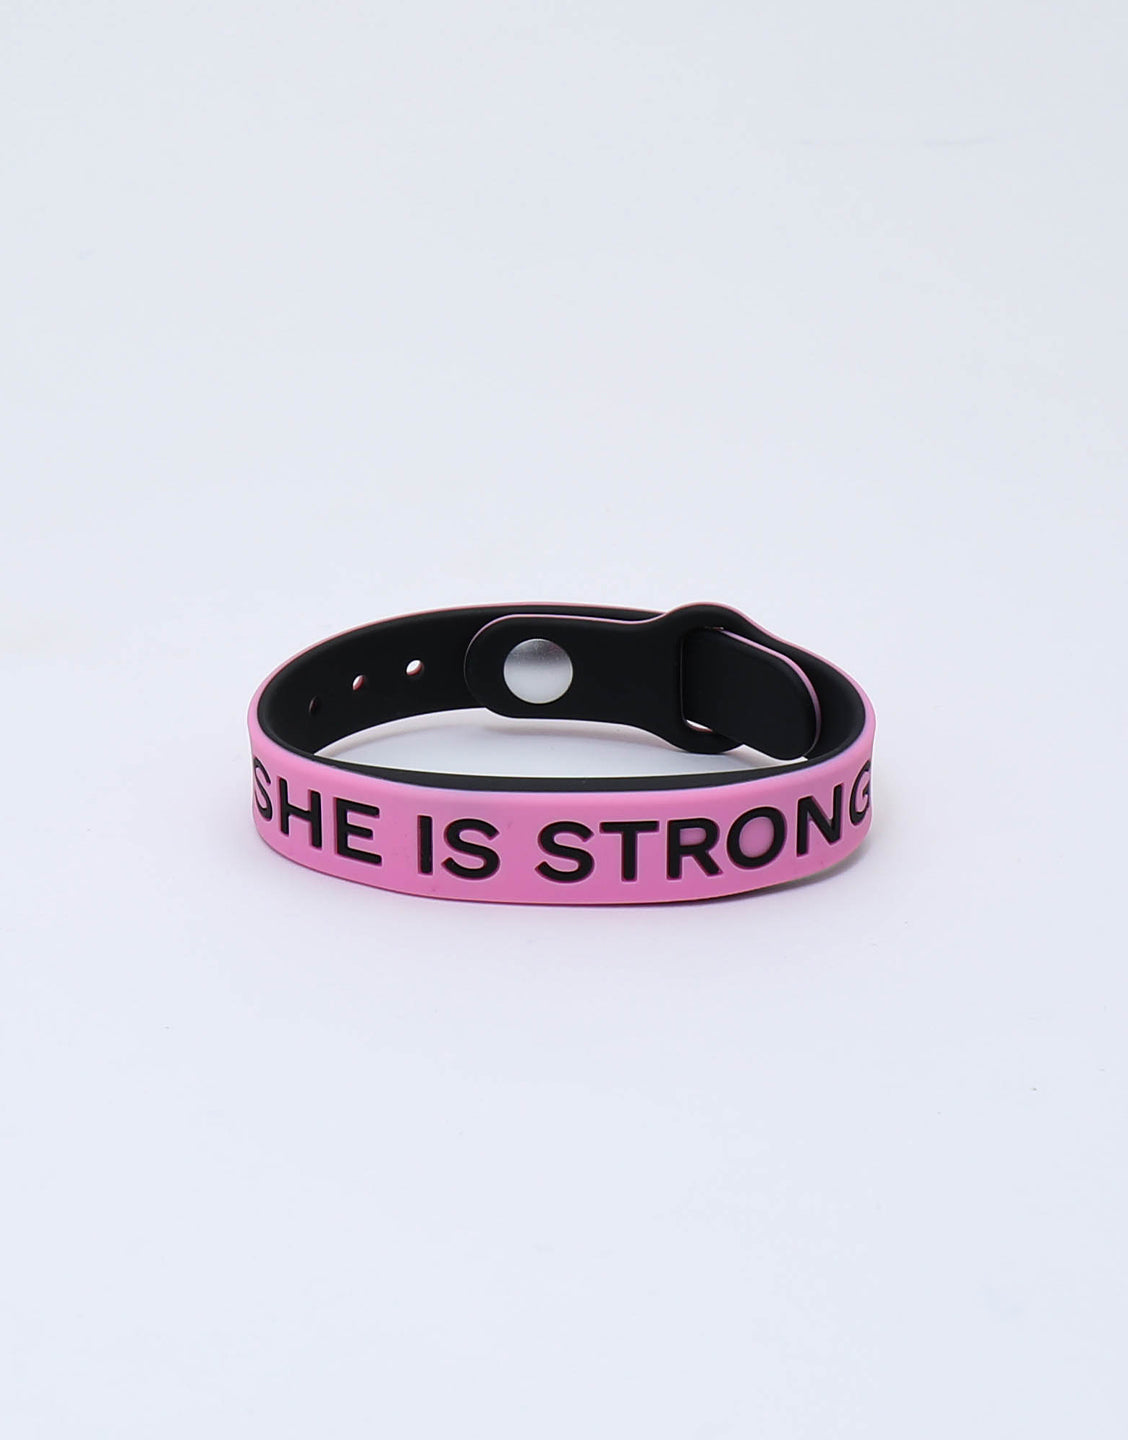 SHE IS STRONG Premium Silicone Wristband + Free Velvet Pouch- Pink